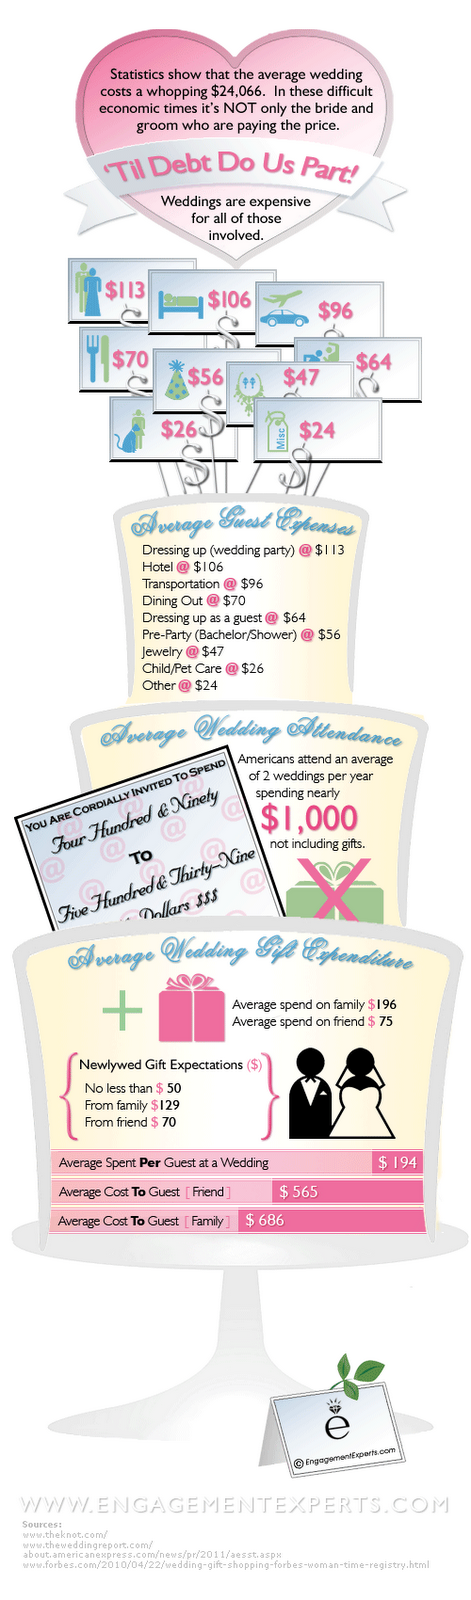 Cost to Wedding Guests